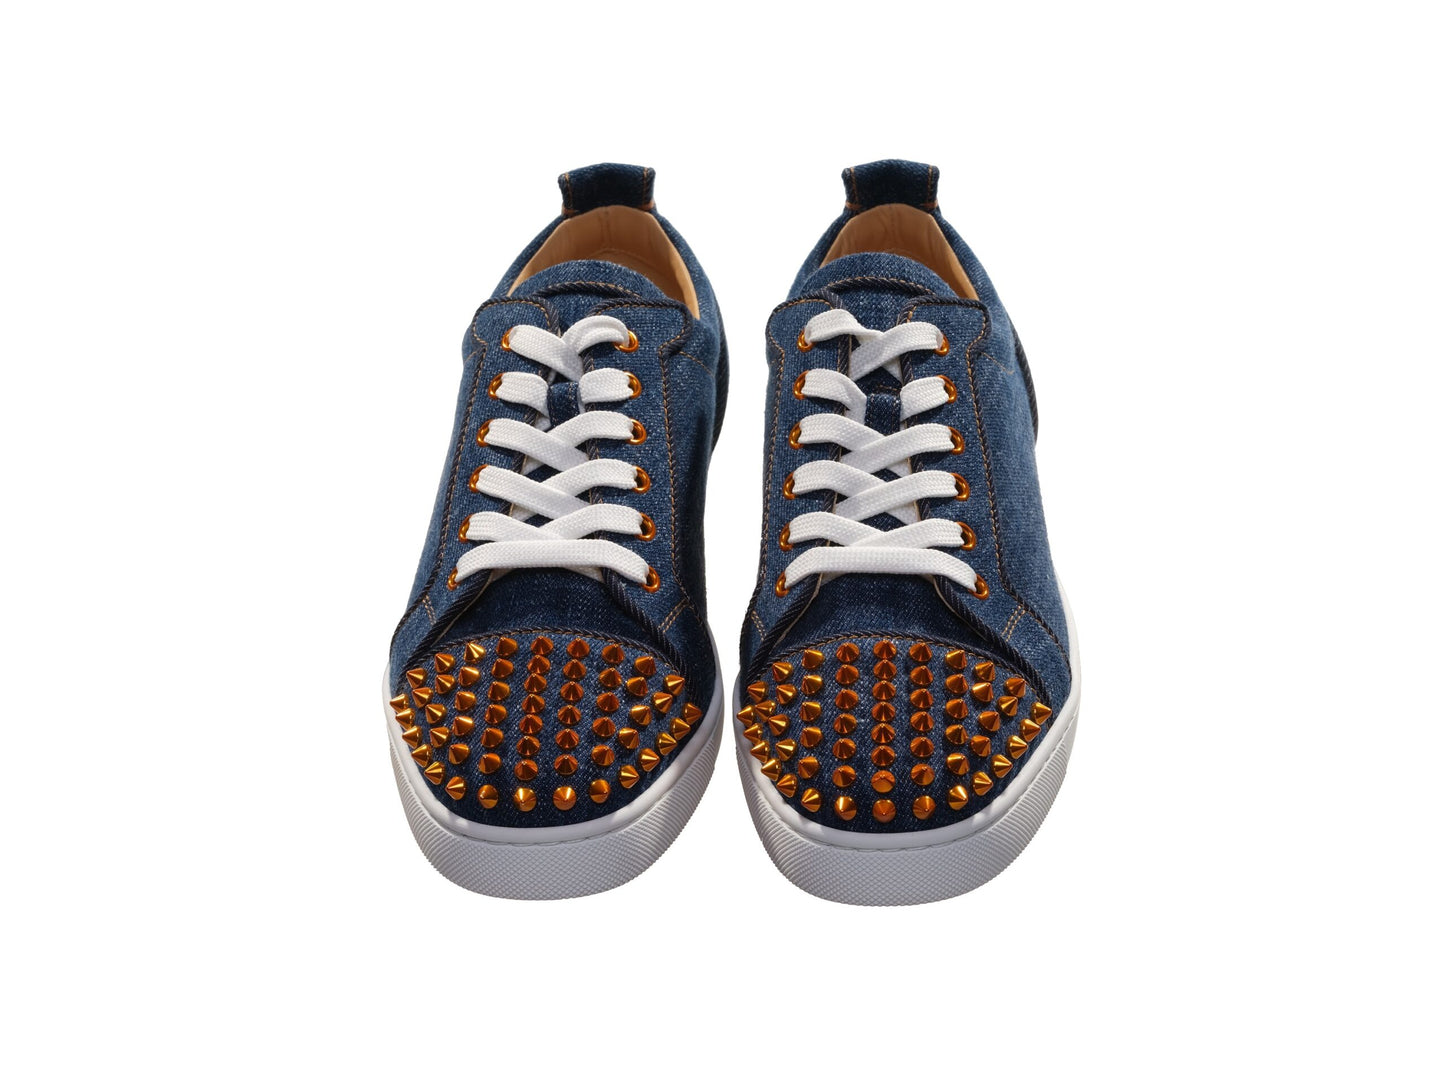 Fun Louis Junior Spikes Flat Denim and Gold Spike Sneakers